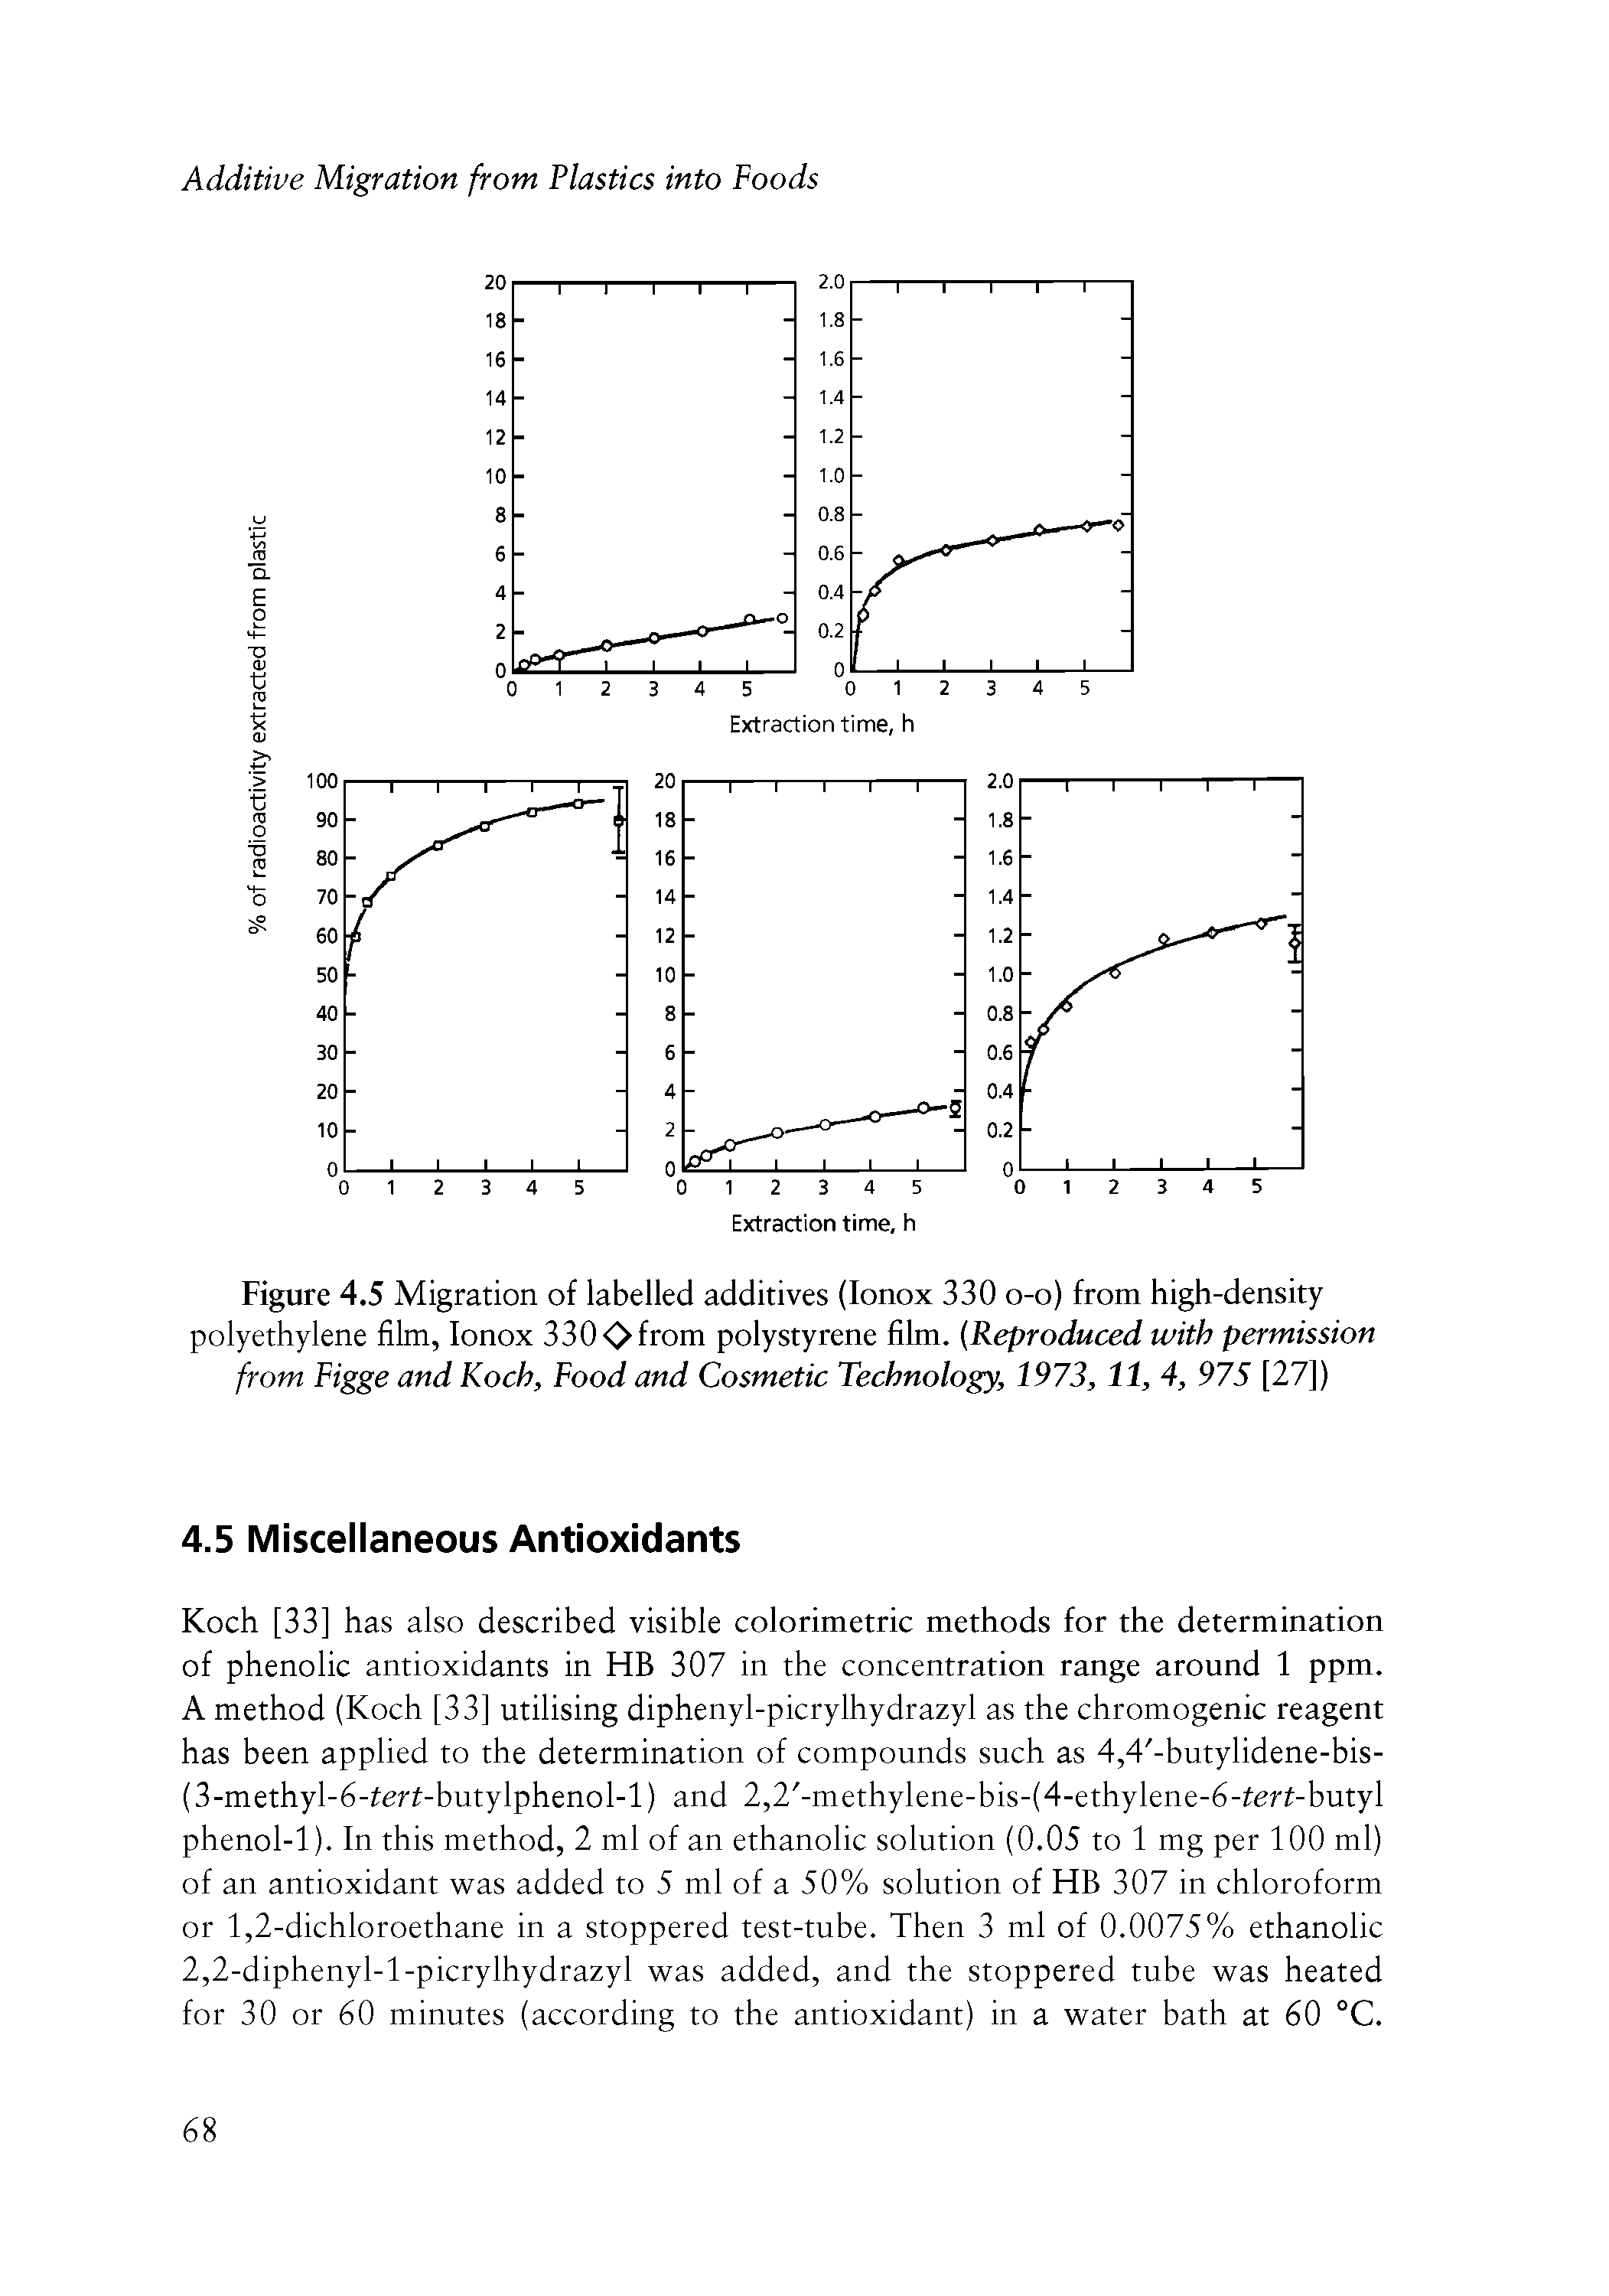 Figure 4.5 Migration of labelled additives (lonox 330 o-o) from high-density polyethylene film, lonox 3300 from polystyrene film. Reproduced with permission from Figge and Koch, Food and Cosmetic Technology, 1973, 11, 4, 975 [27])...